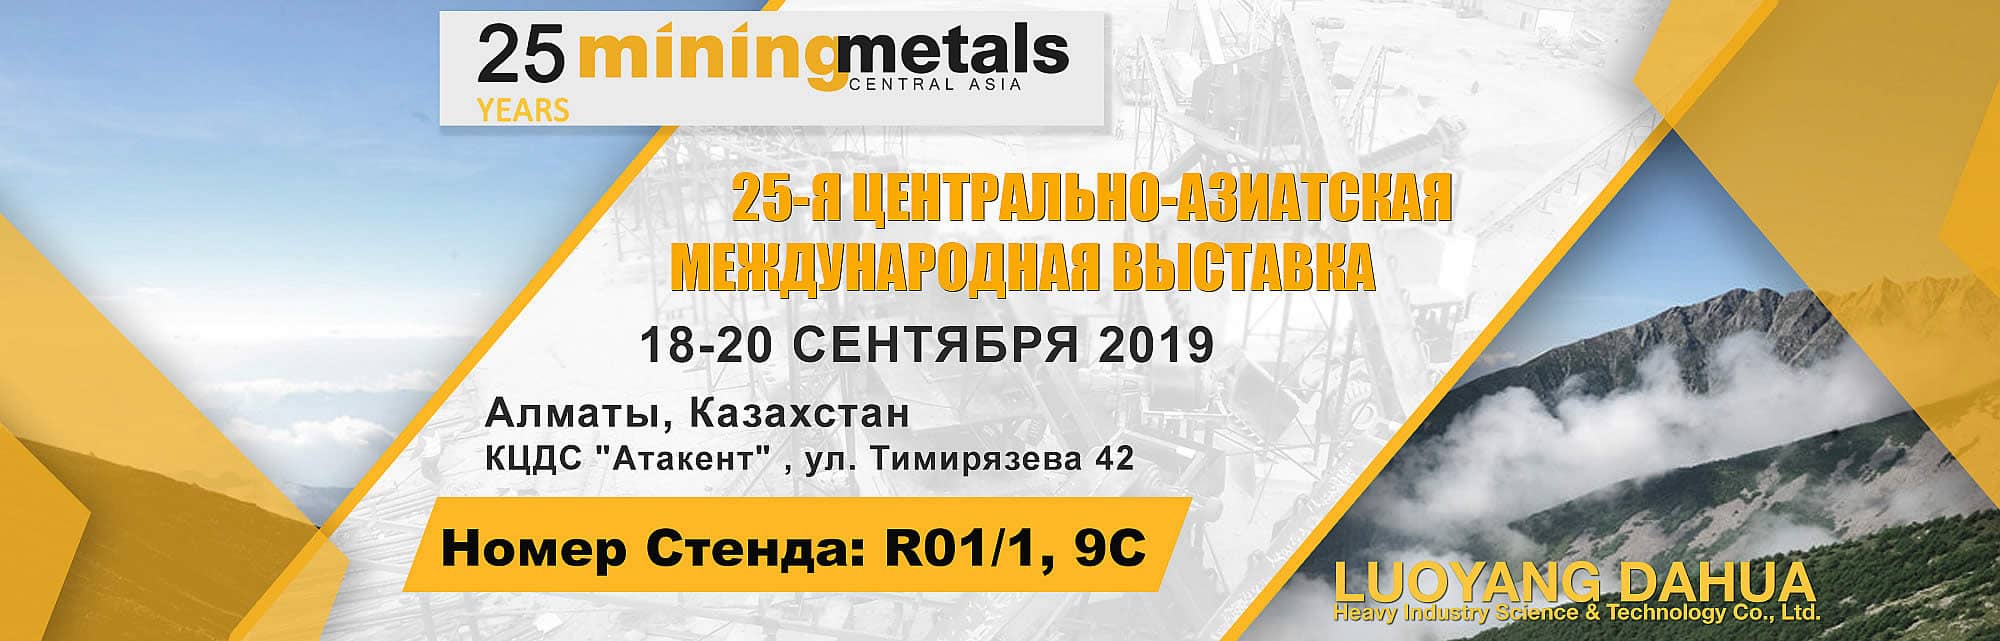 Mining and Metals Central Asia 2019